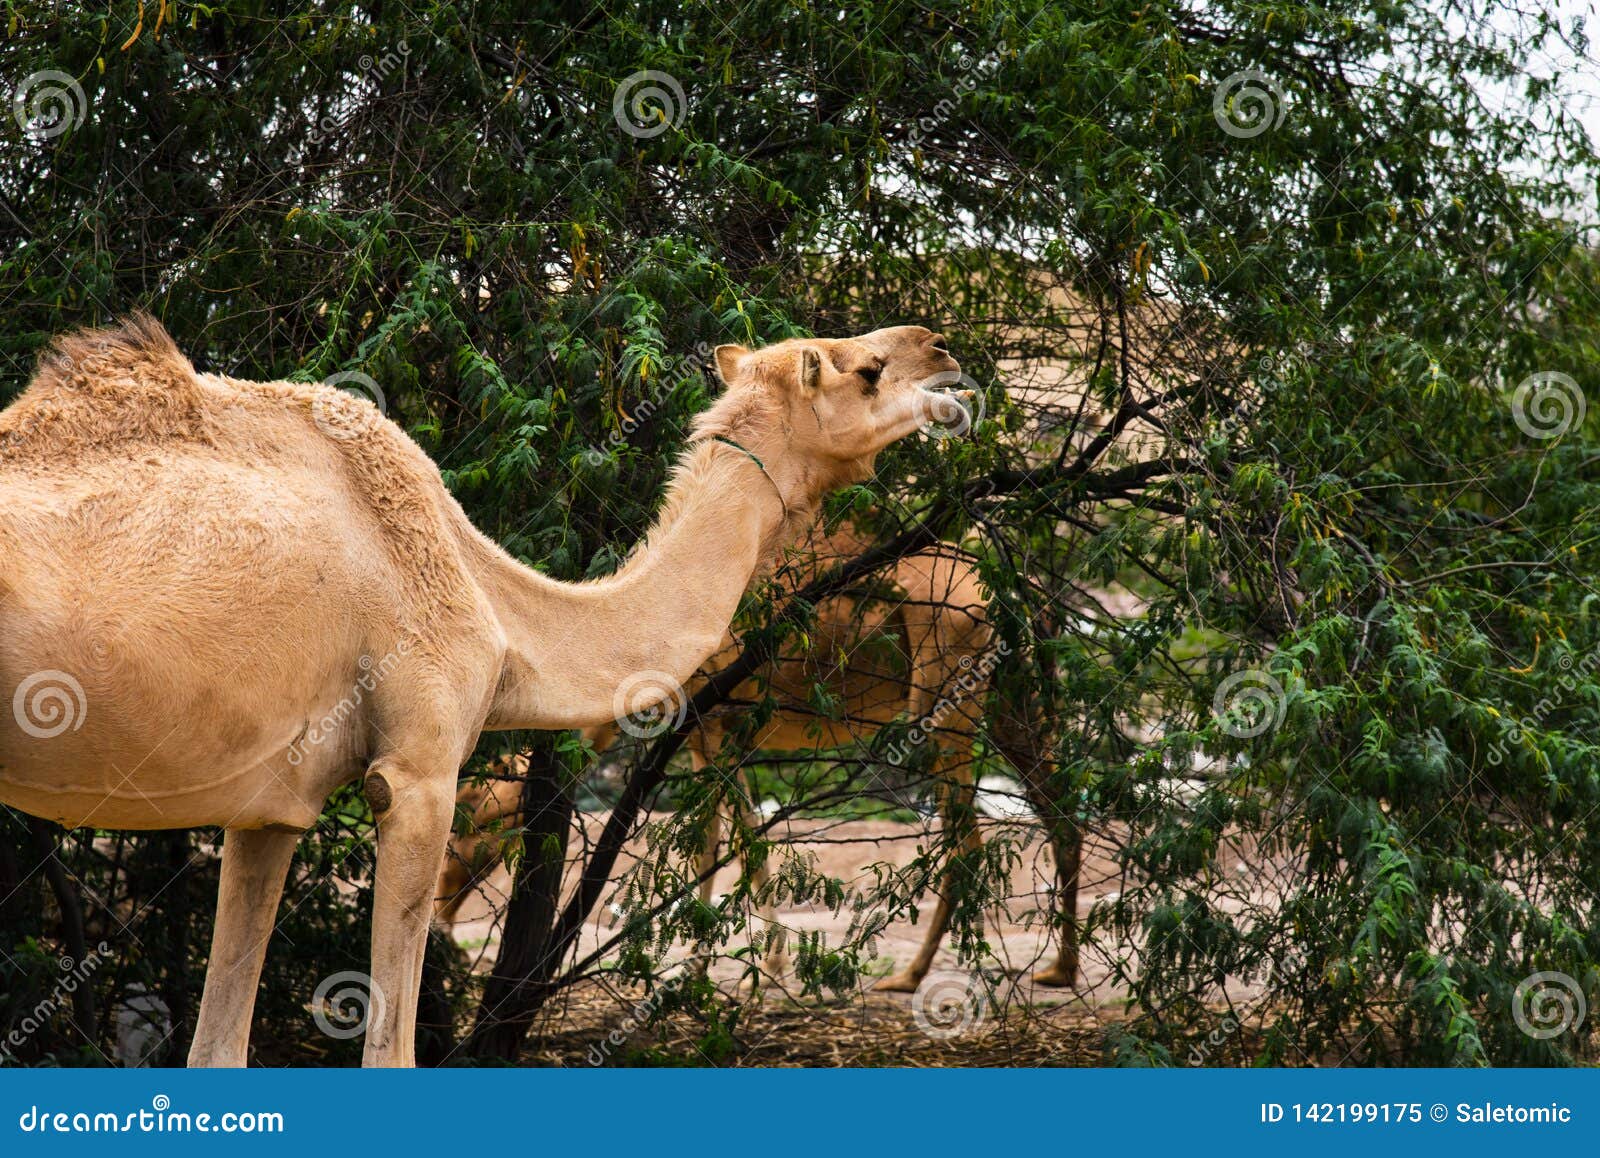 Camels Grazing on Plants in the Desert Stock Image - Image of arabic,  grass: 142199175